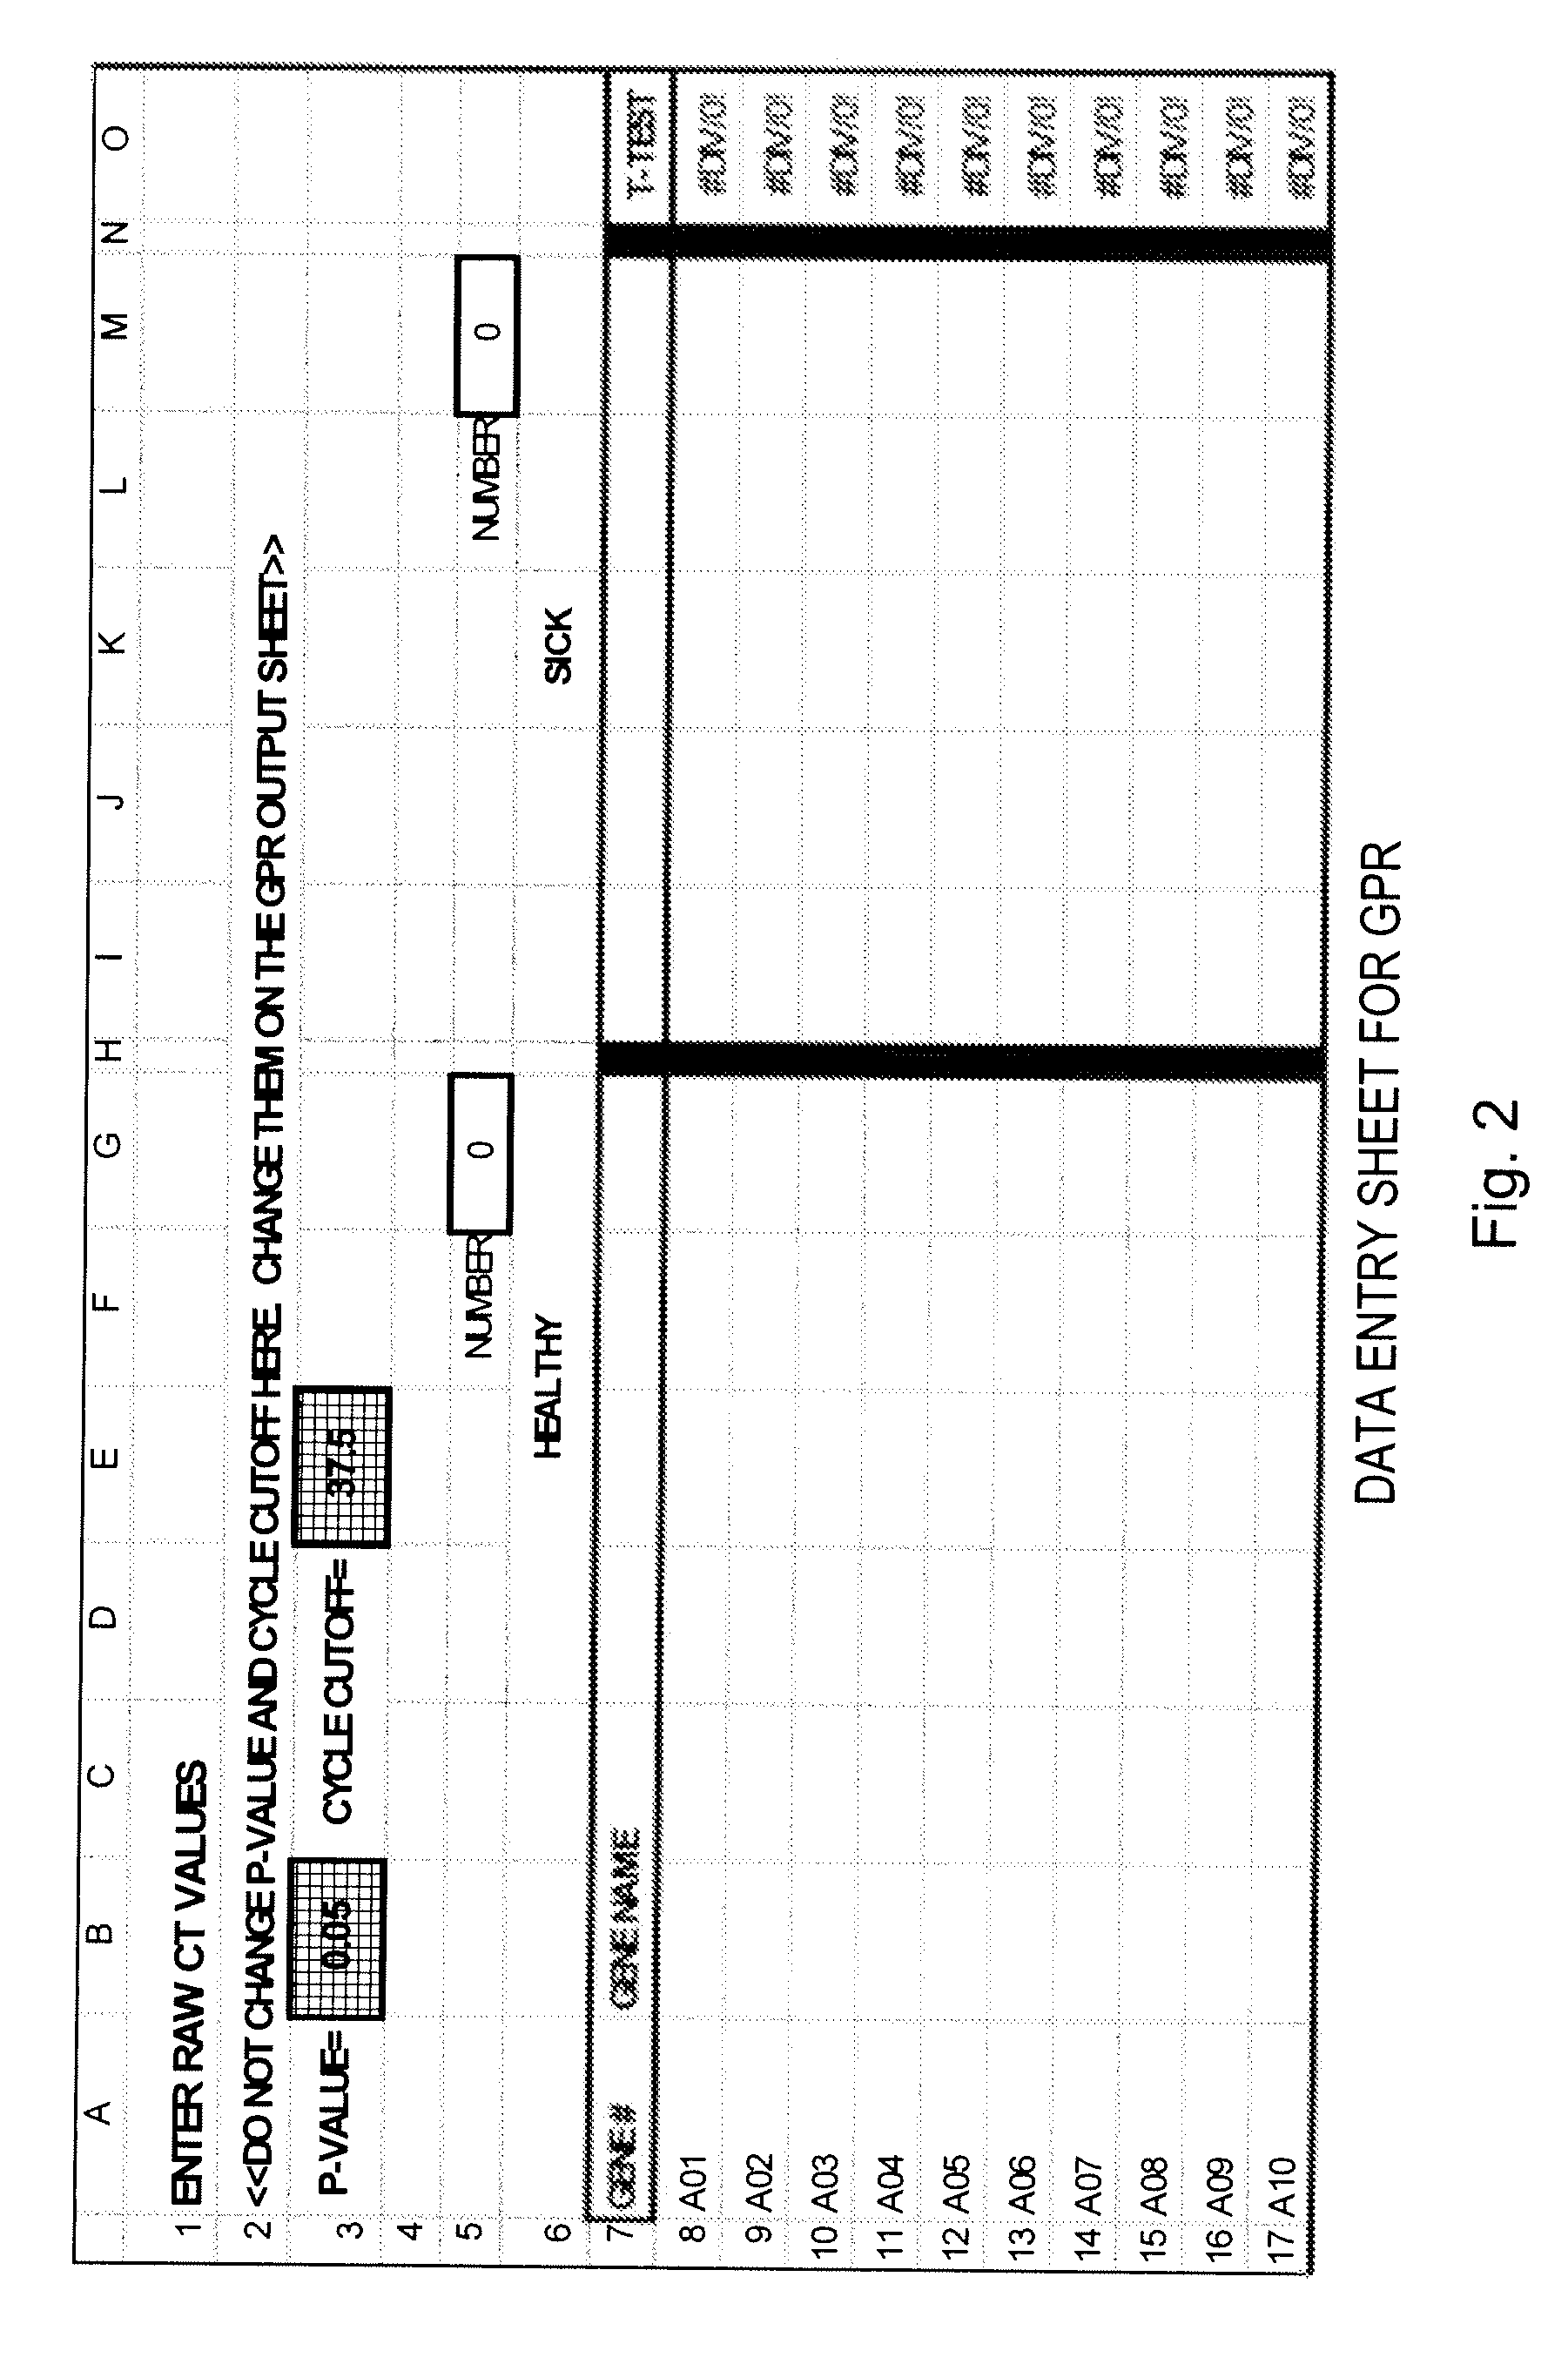 Expression Data Analysis Systems and Methods